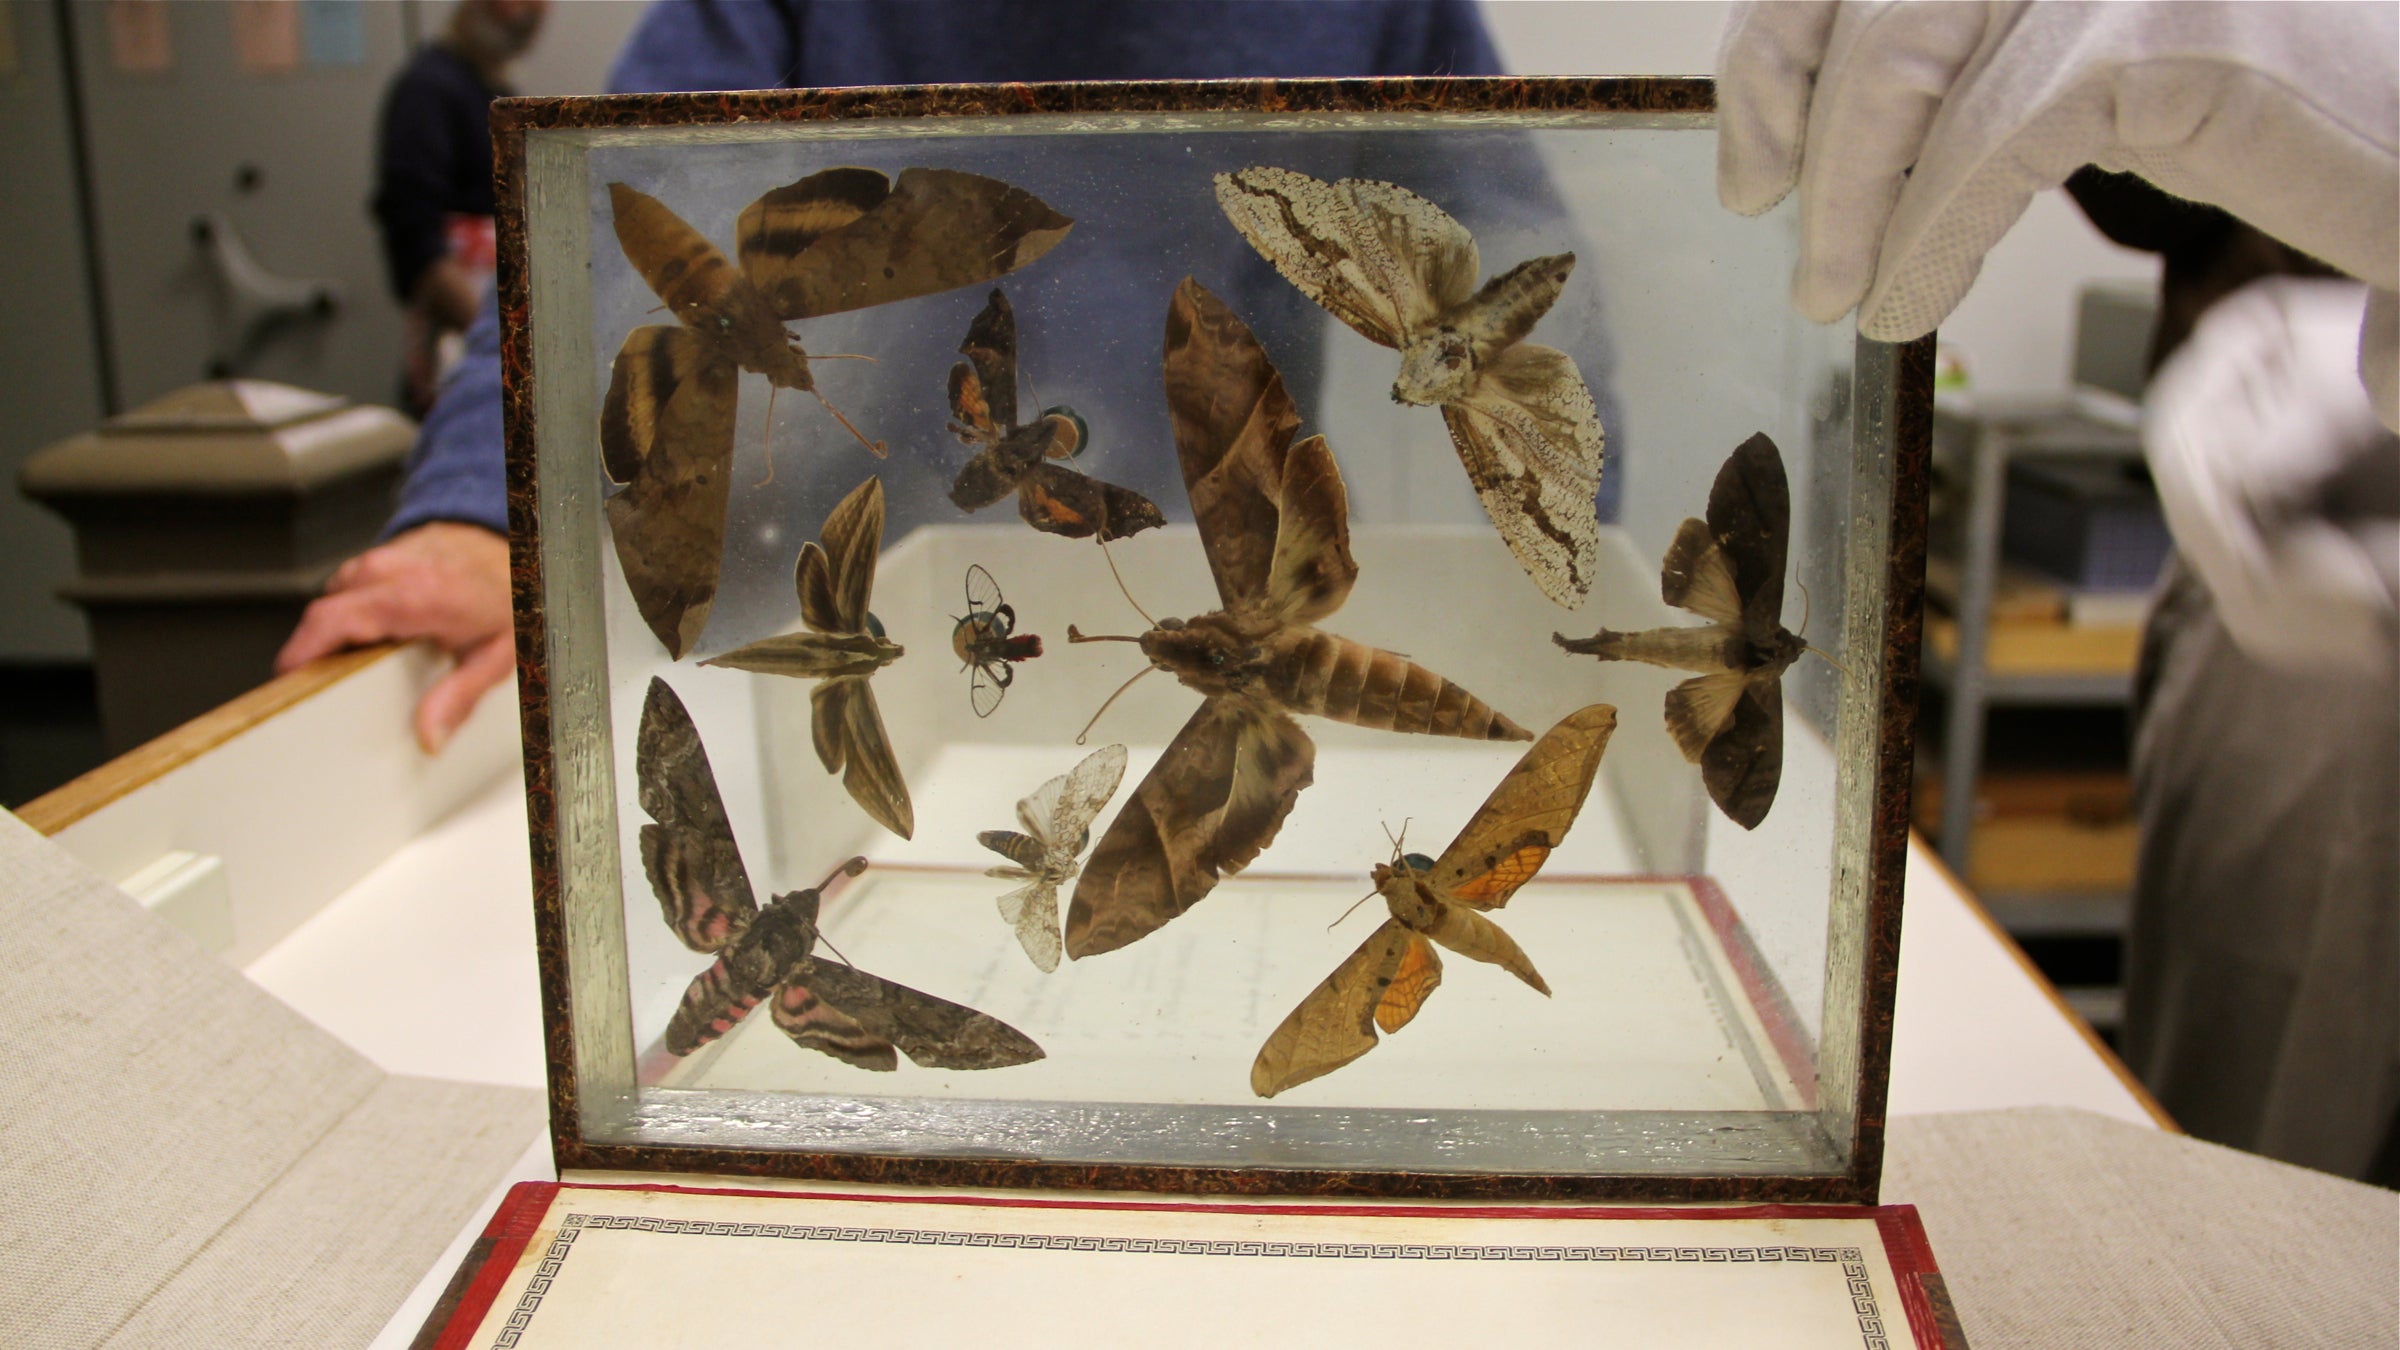  These moths are certainly thinking inside the box — Titian Peale collected them from all over the world and arranged them artistically in sealed glass cases in 'books.' (Emma Lee/WHYY) 